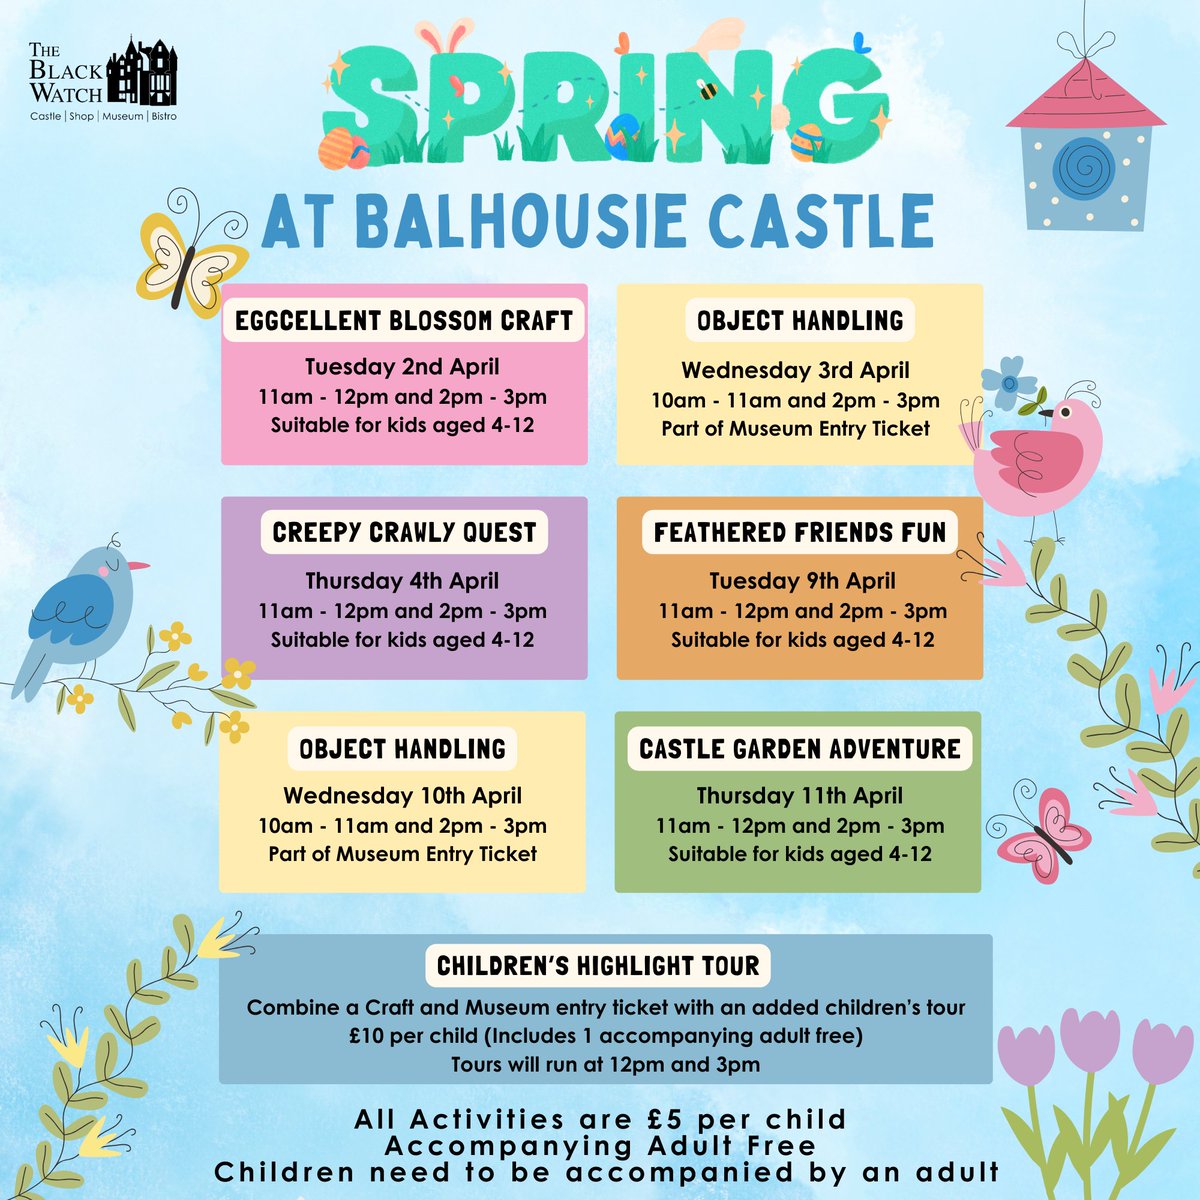 Embark on a nature-filled adventure this Spring! 

Join us for 4 unique crafts, Creepy Crawly Quest, Castle Garden Adventure, Feathered Friends Fun & Eggcellent Blossom crafts.

Book your ticket: bit.ly/3v8OcnK

#BalhousieCastle #crafts #spring #familyfun #bwmuseum